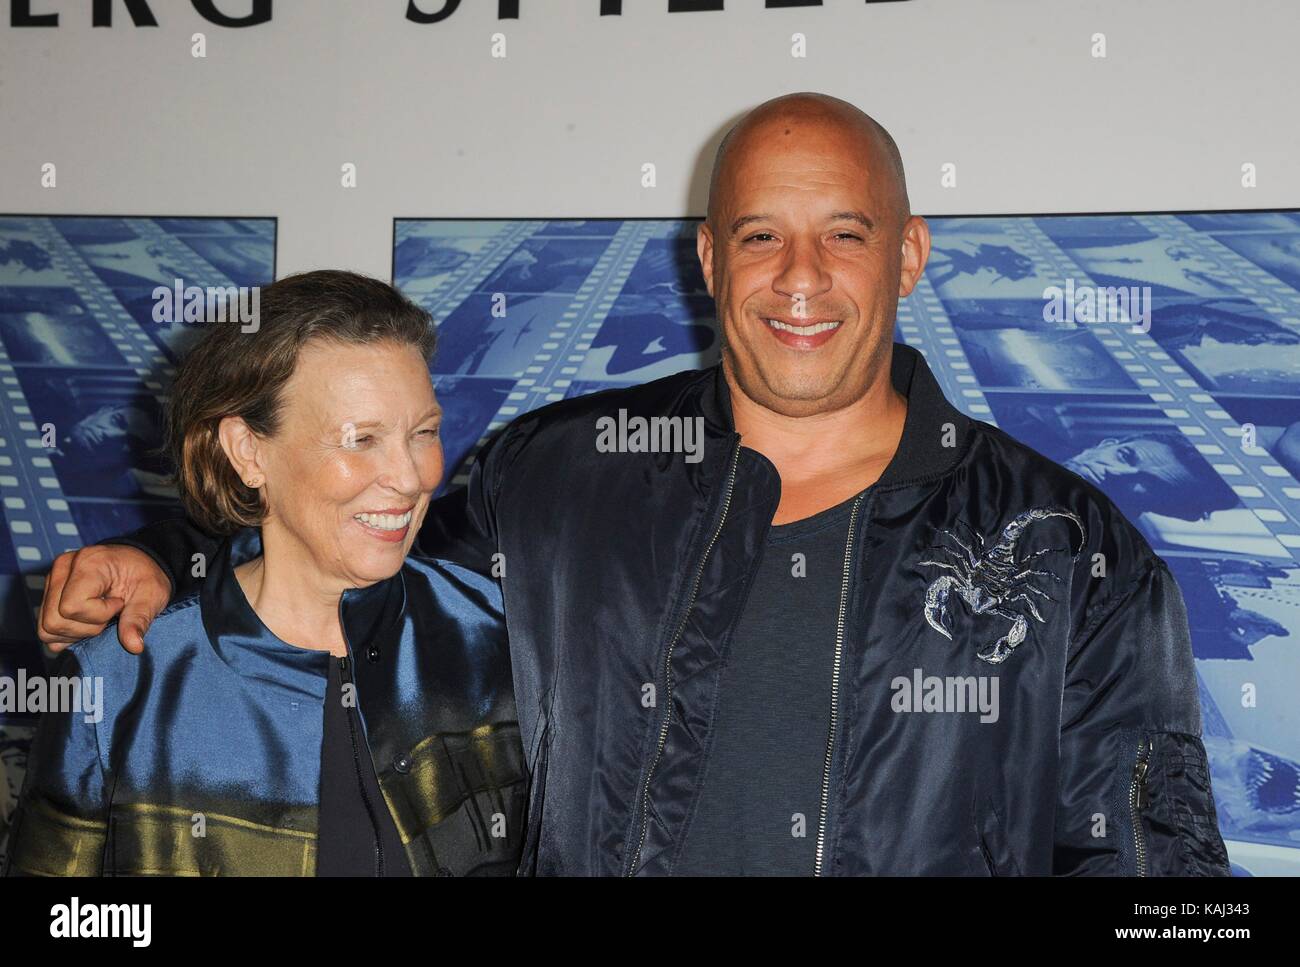 Los Angeles, CA, USA. 26th Sep, 2017. Delora Vincent, Vin Diesel at arrivals for HBO's Documentary Film SPIELBERG Premiere, Paramount Studios, Los Angeles, CA September 26, 2017. Credit: Elizabeth Goodenough/Everett Collection/Alamy Live News Stock Photo